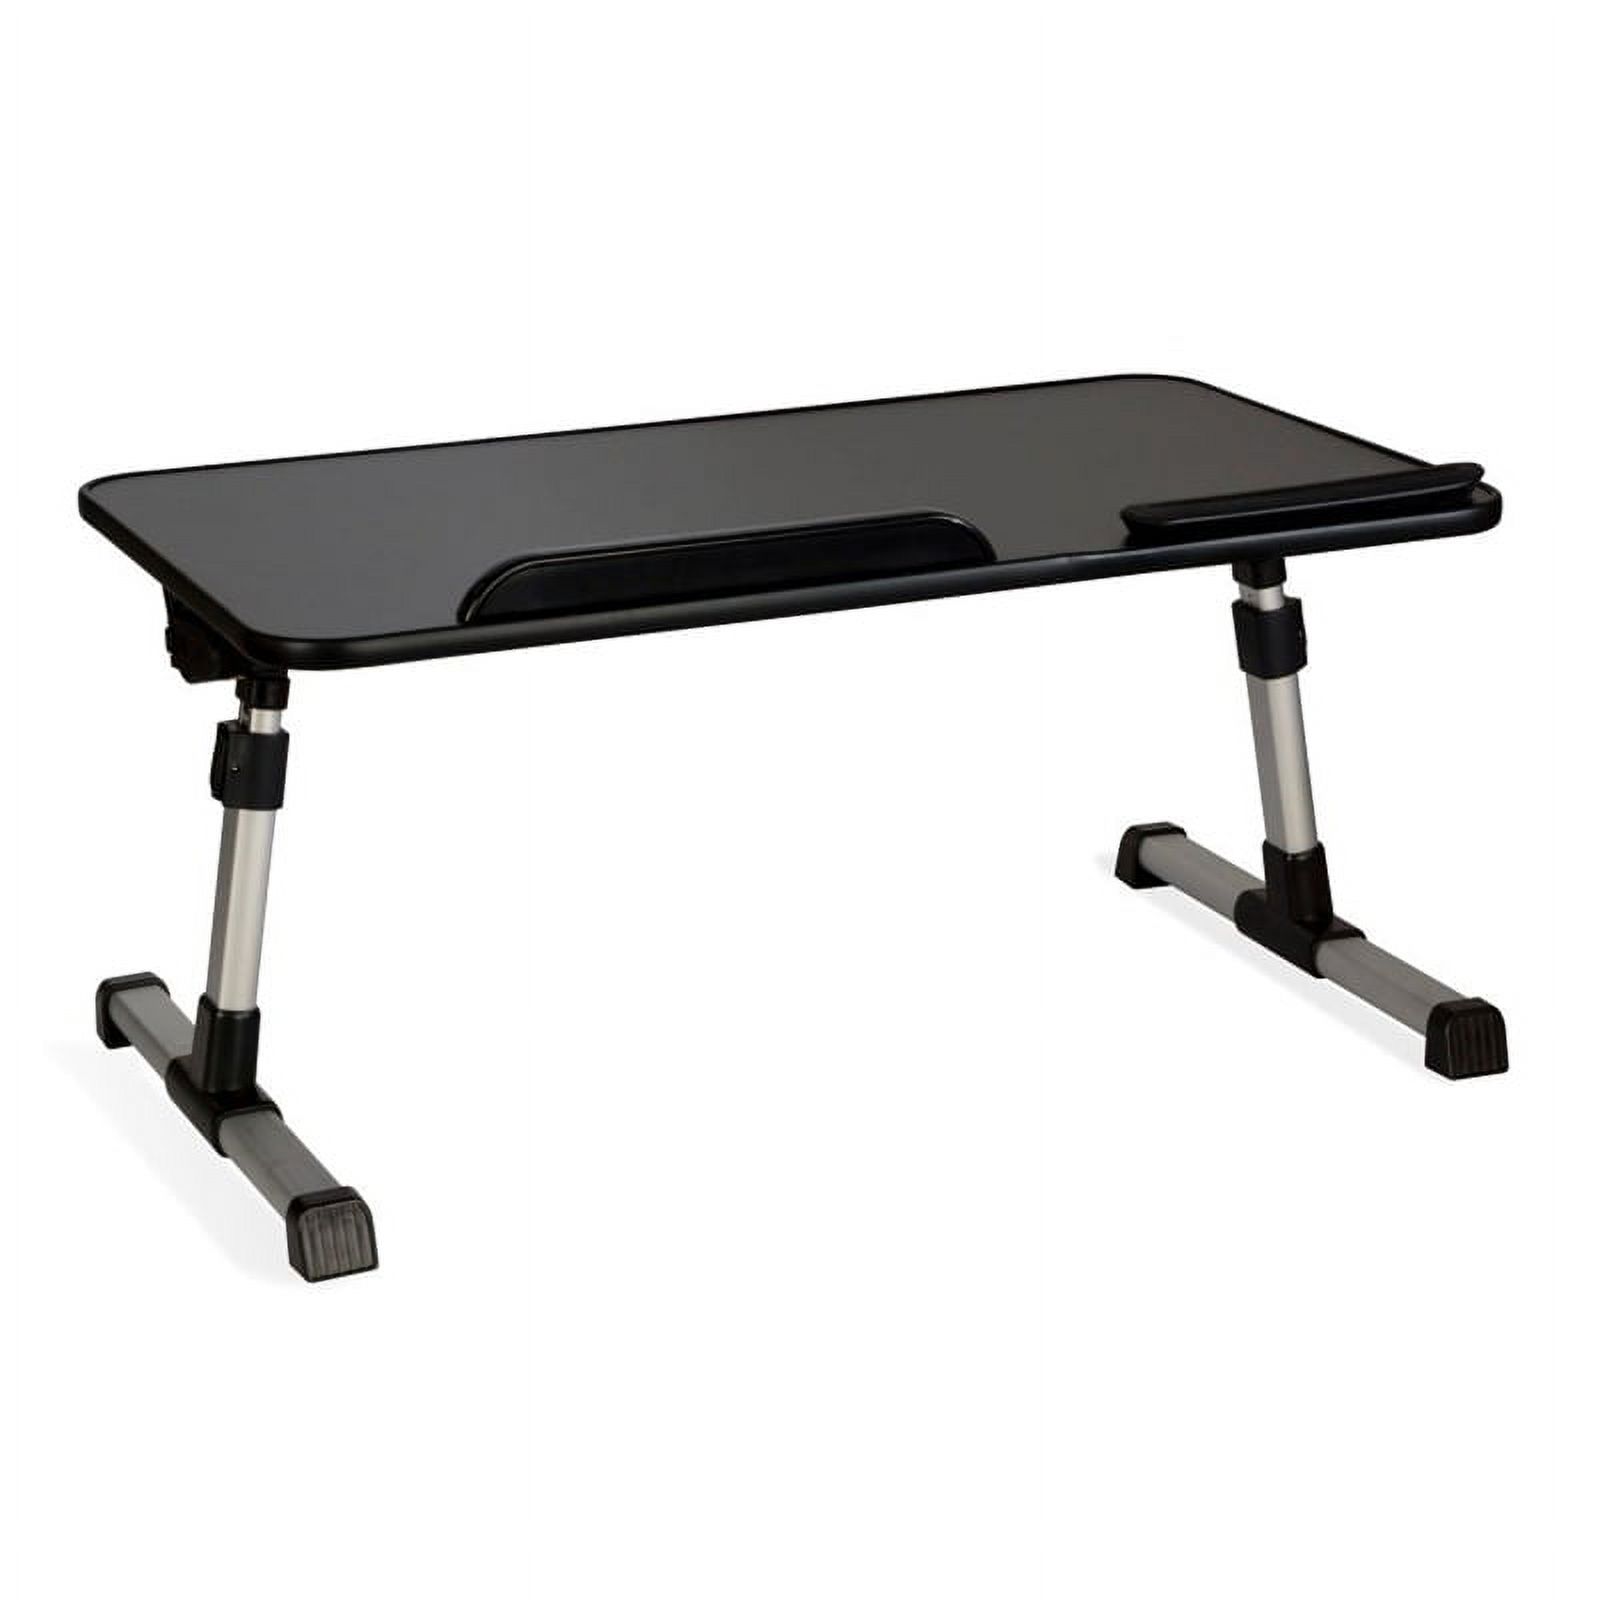 Atlantic Portable Laptop Tray Table with Adjustablt Height and Tilt, Fits Laptops up to 20", Black - image 2 of 8